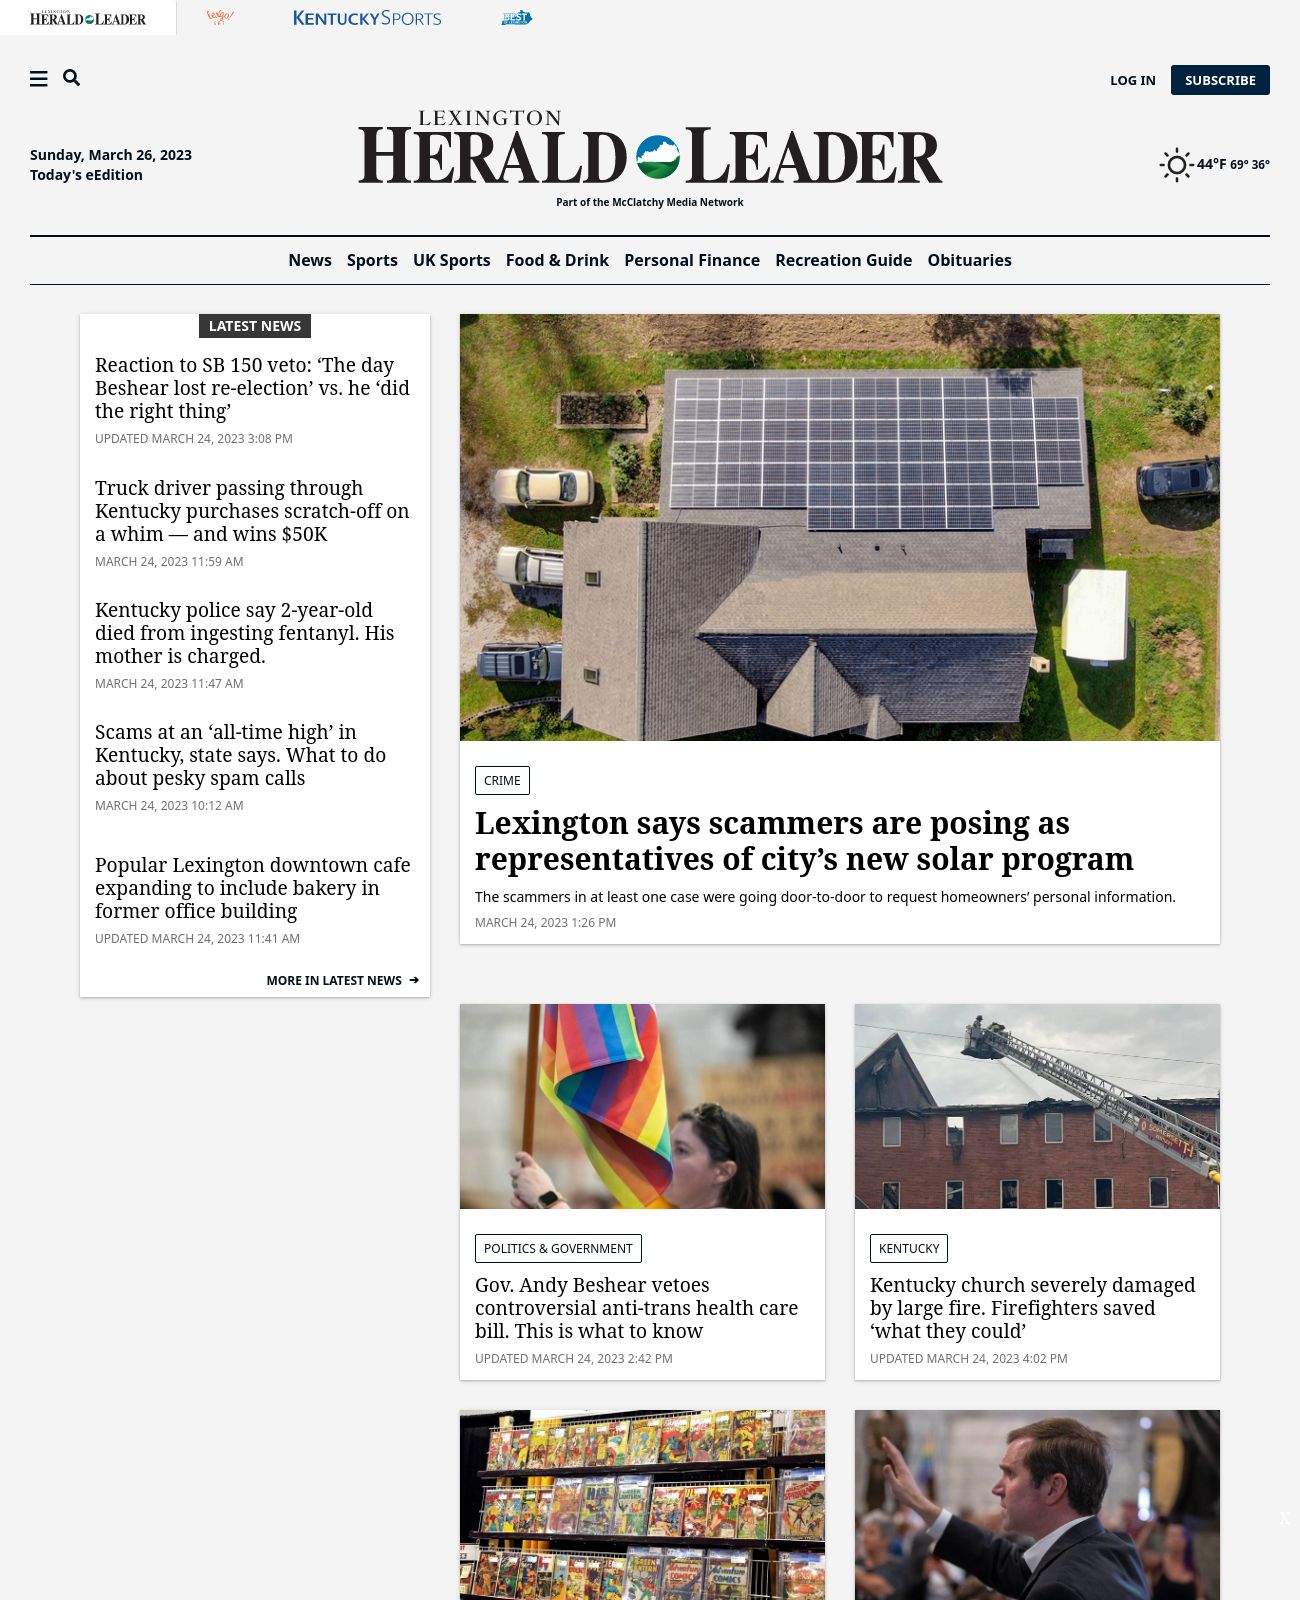 Lexington Herald-Leader at 2023-03-26 09:45:08-04:00 local time